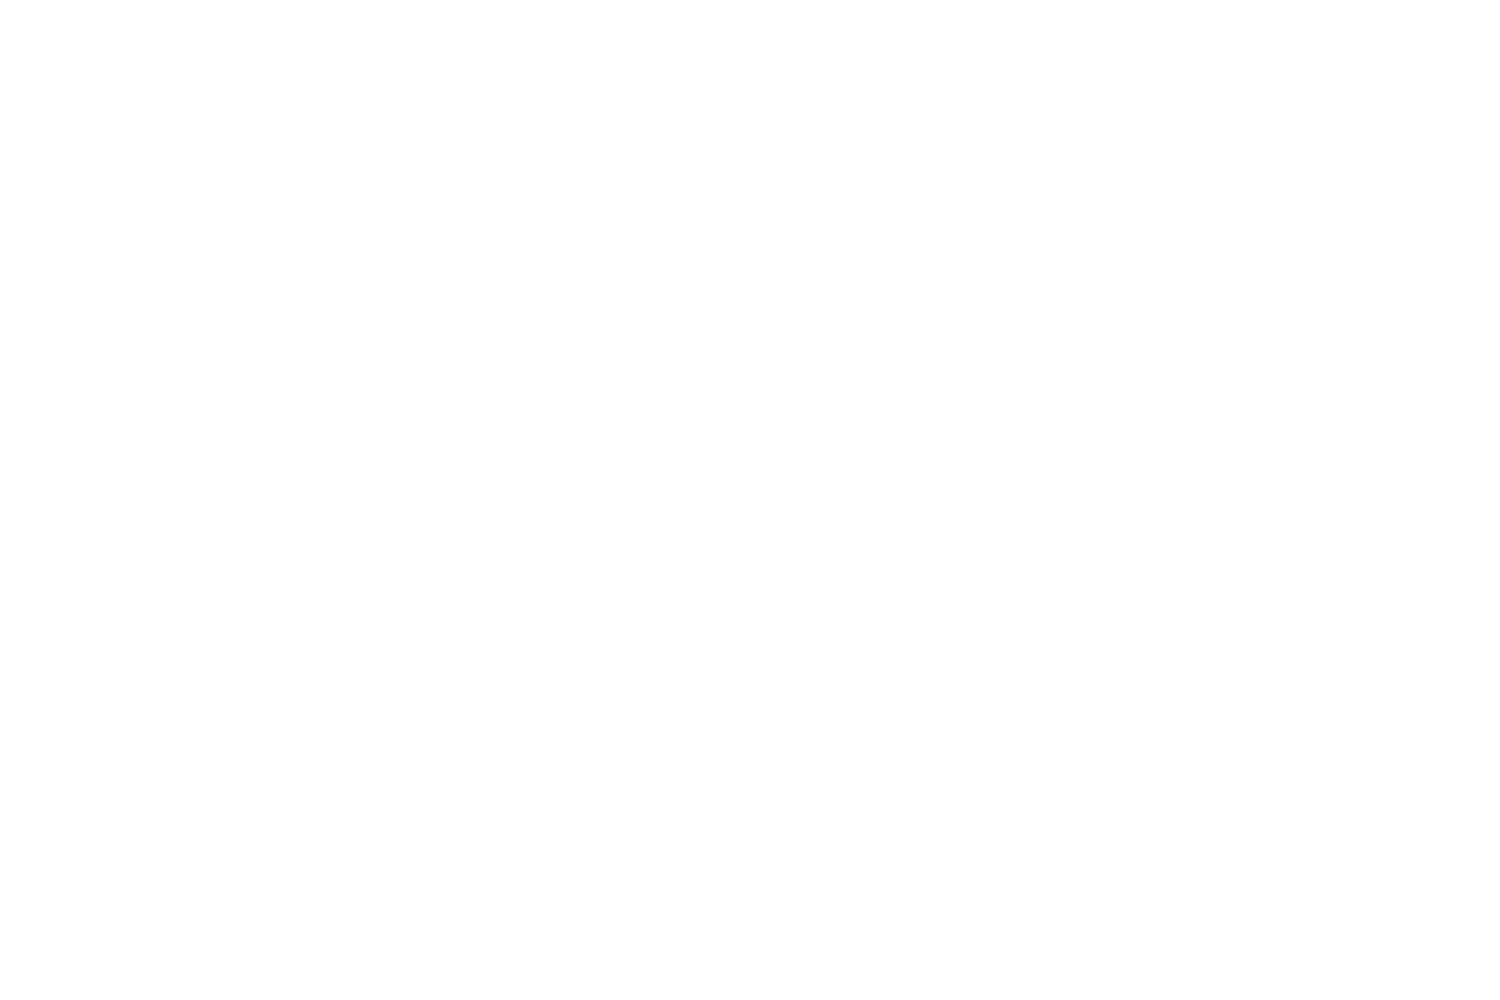 LowVisionShopWebsite.png